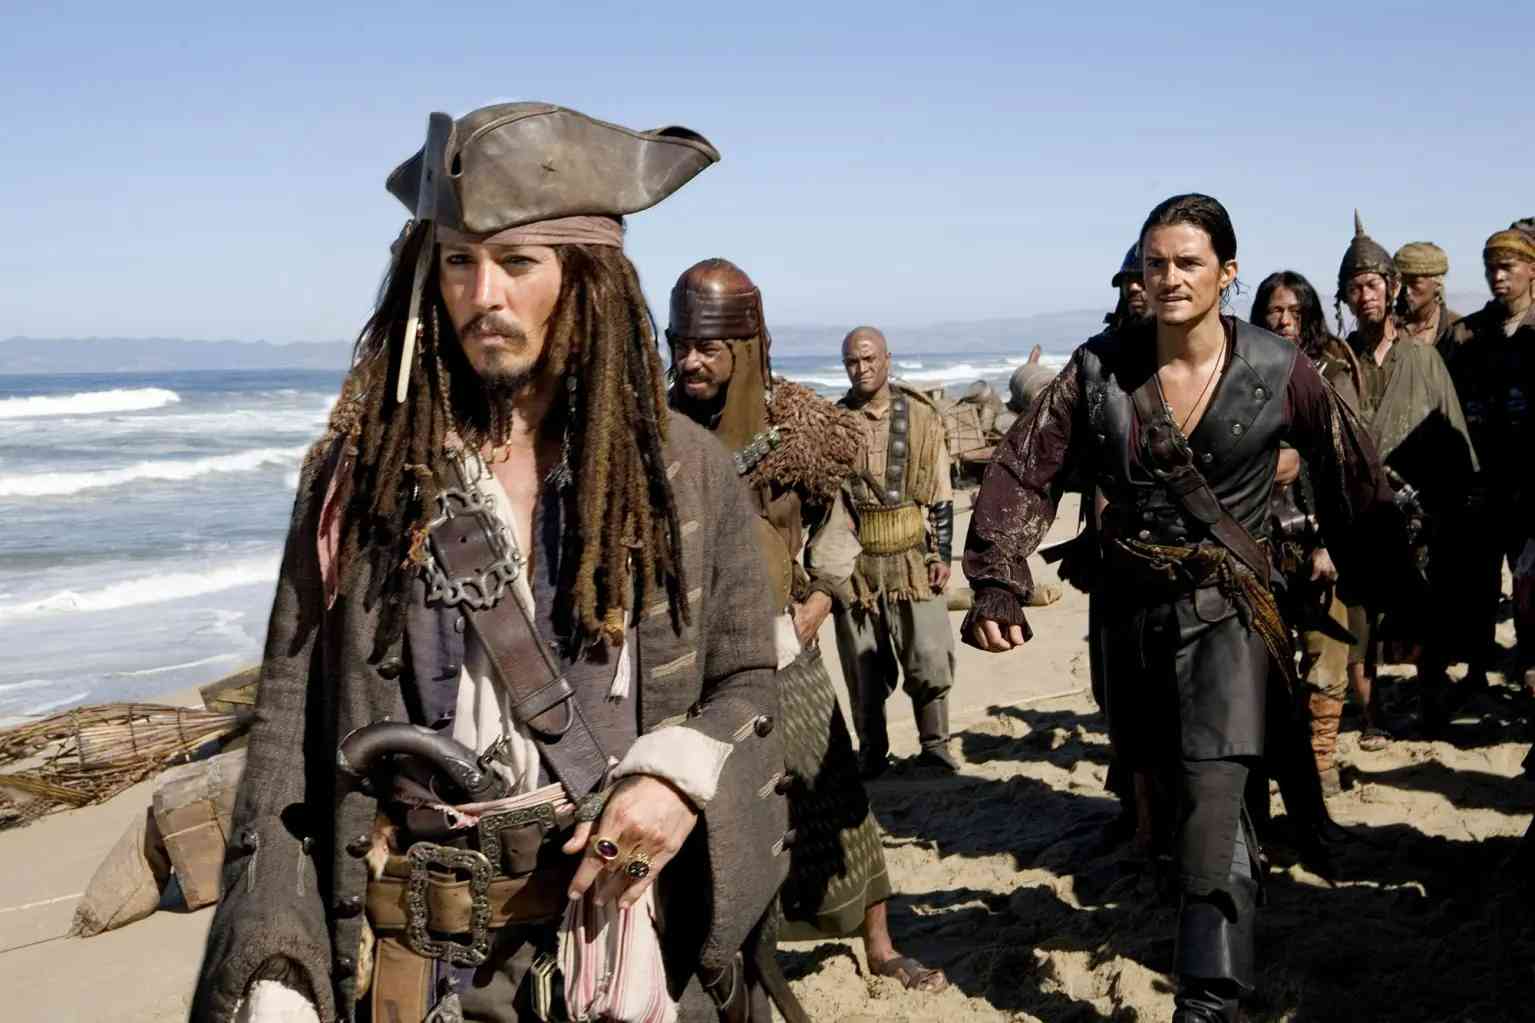 Pirates-of-the-Caribbean:-At-World's-End-in-Australia